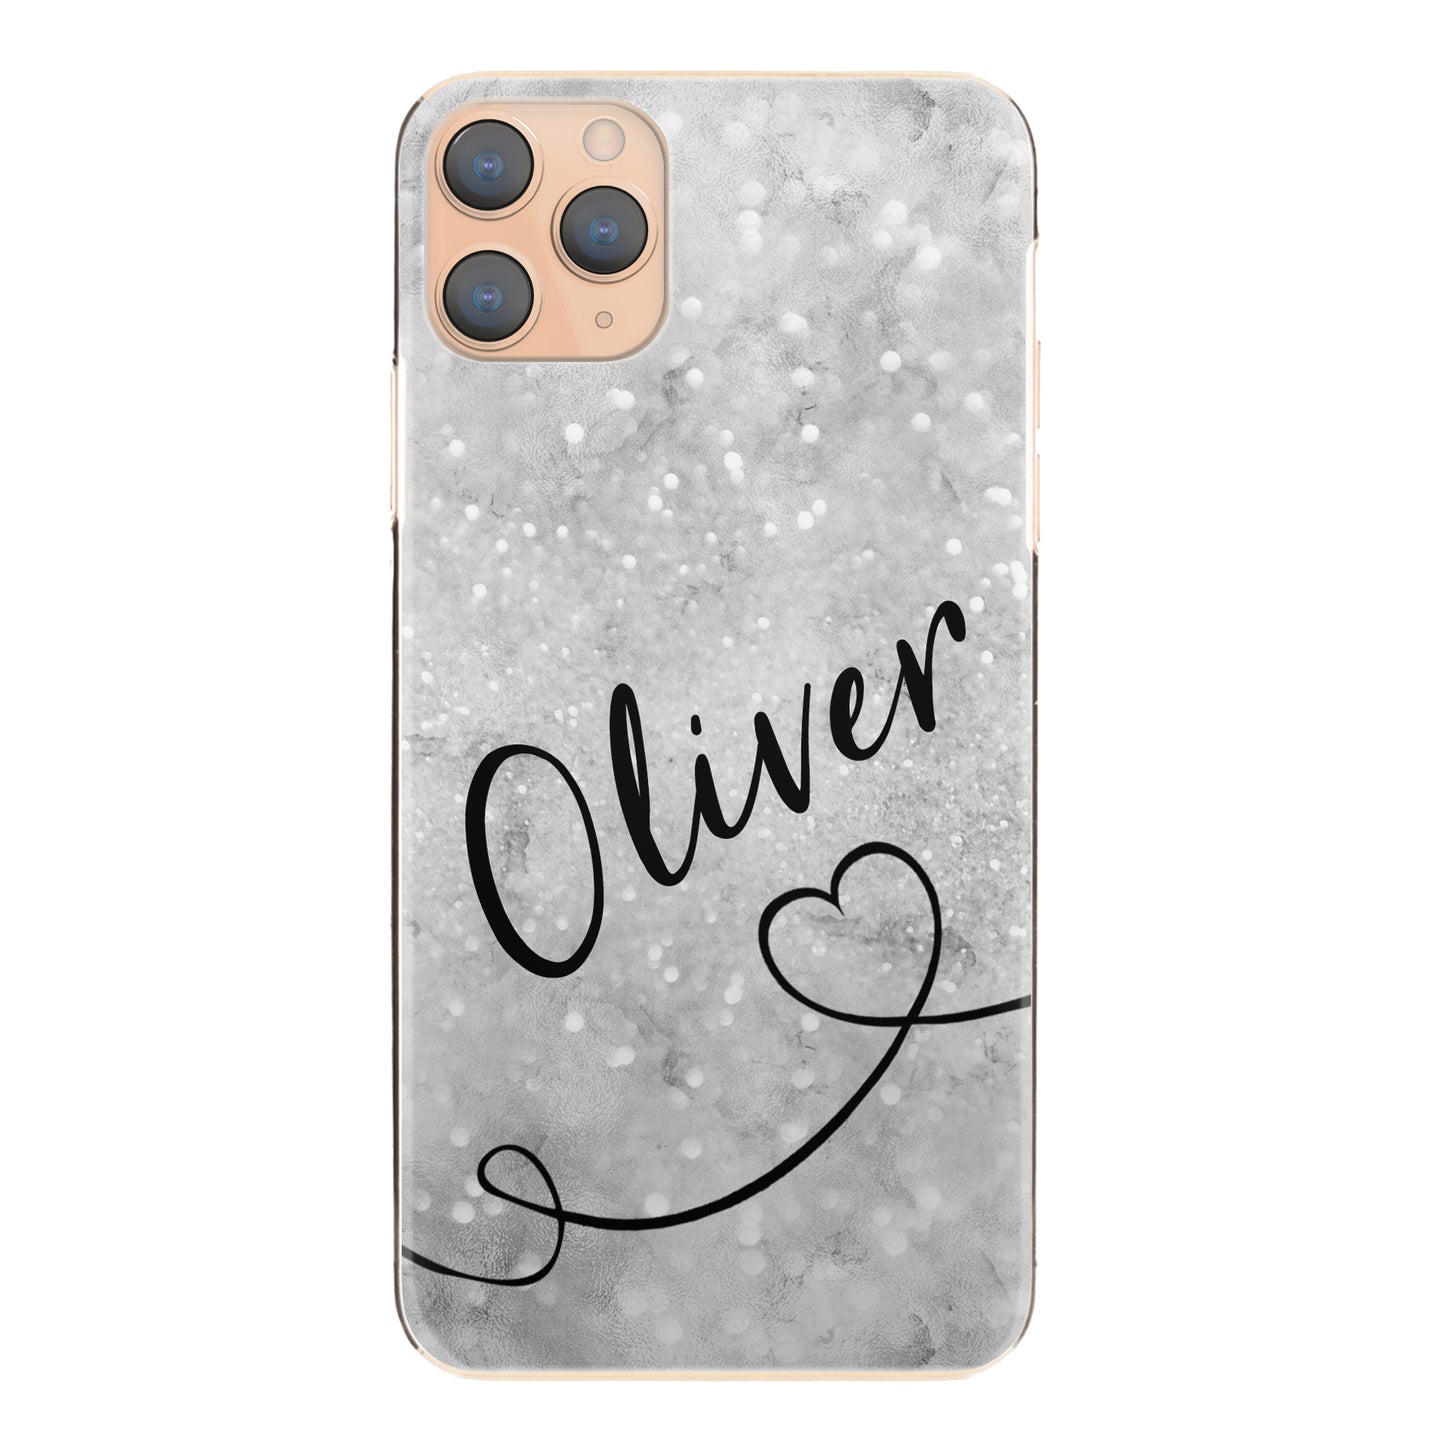 Personalised Nokia Phone Hard Case with Stylish Text and Heart Line on Textured Grey